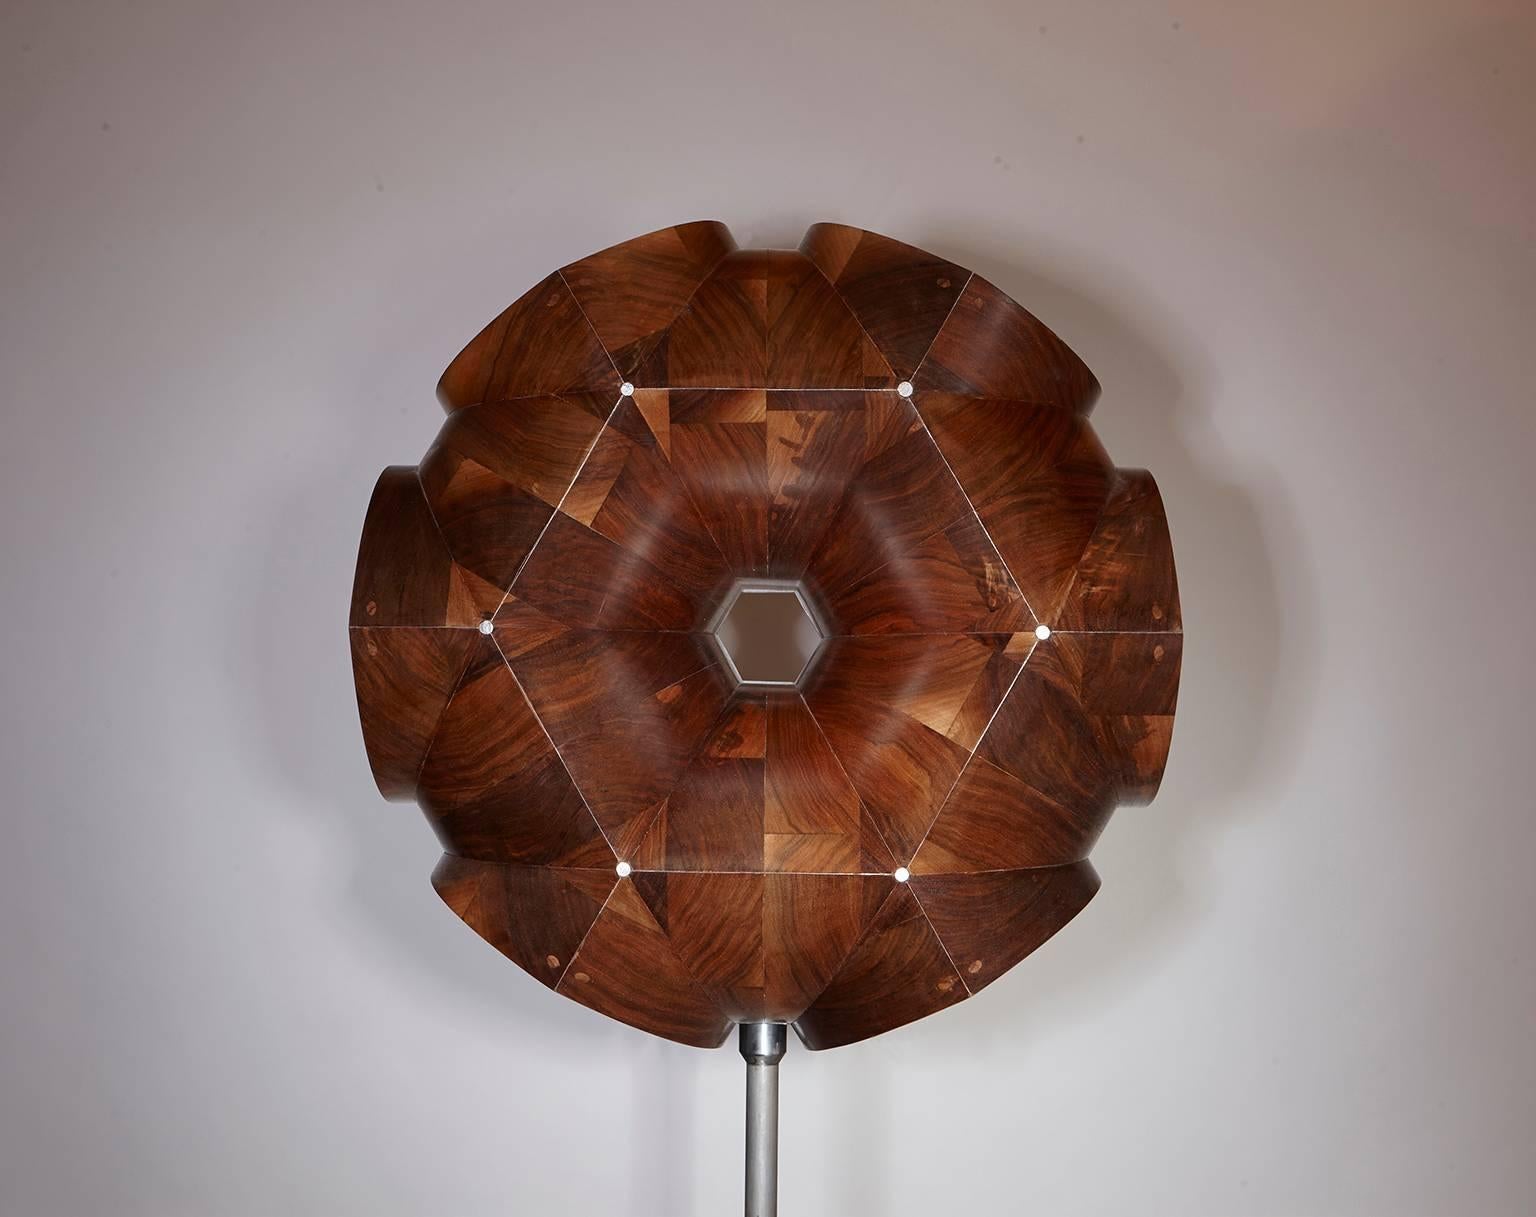 Contemporary Geometric Solid Oak Wood Chandelier with Cathedral Arches by Eddy Sykes For Sale